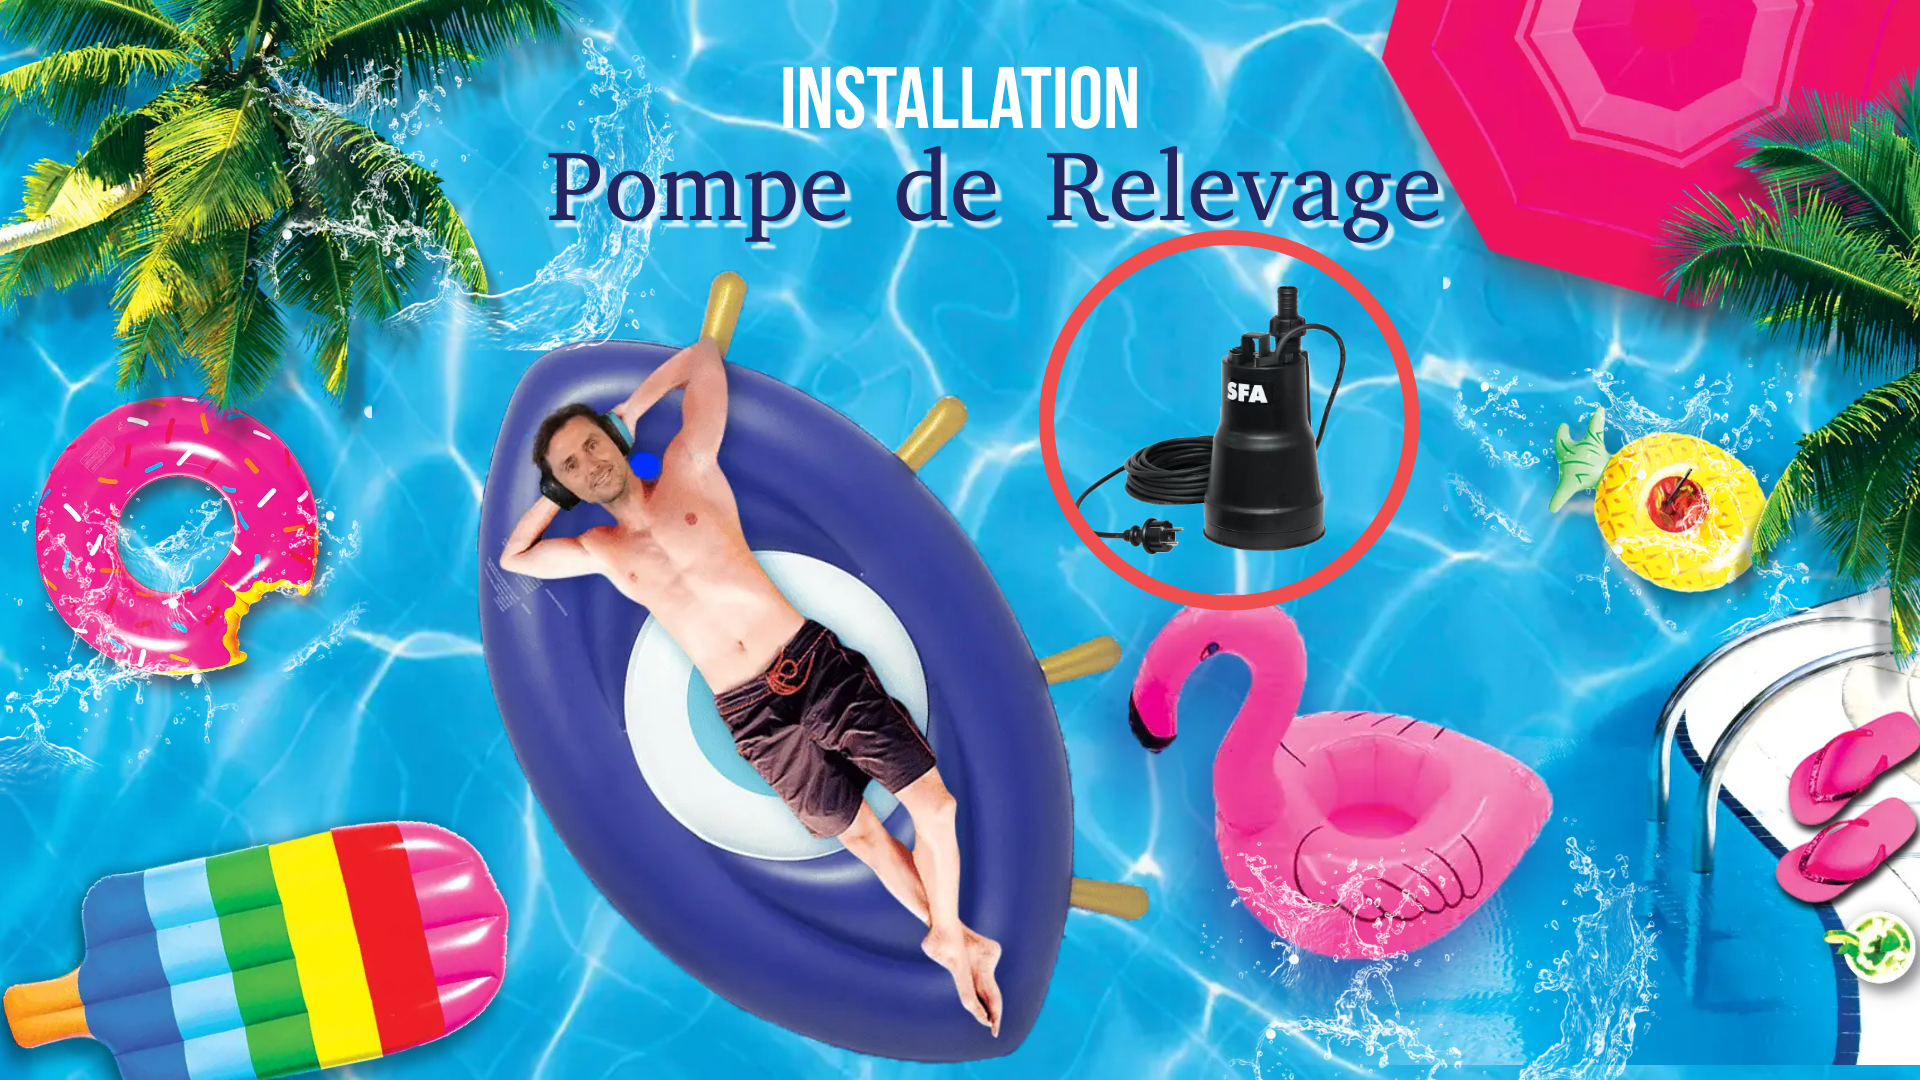 You are currently viewing Installation de la pompe de relevage Sanipuddle à Nice | FS Plomberie & Climatisation